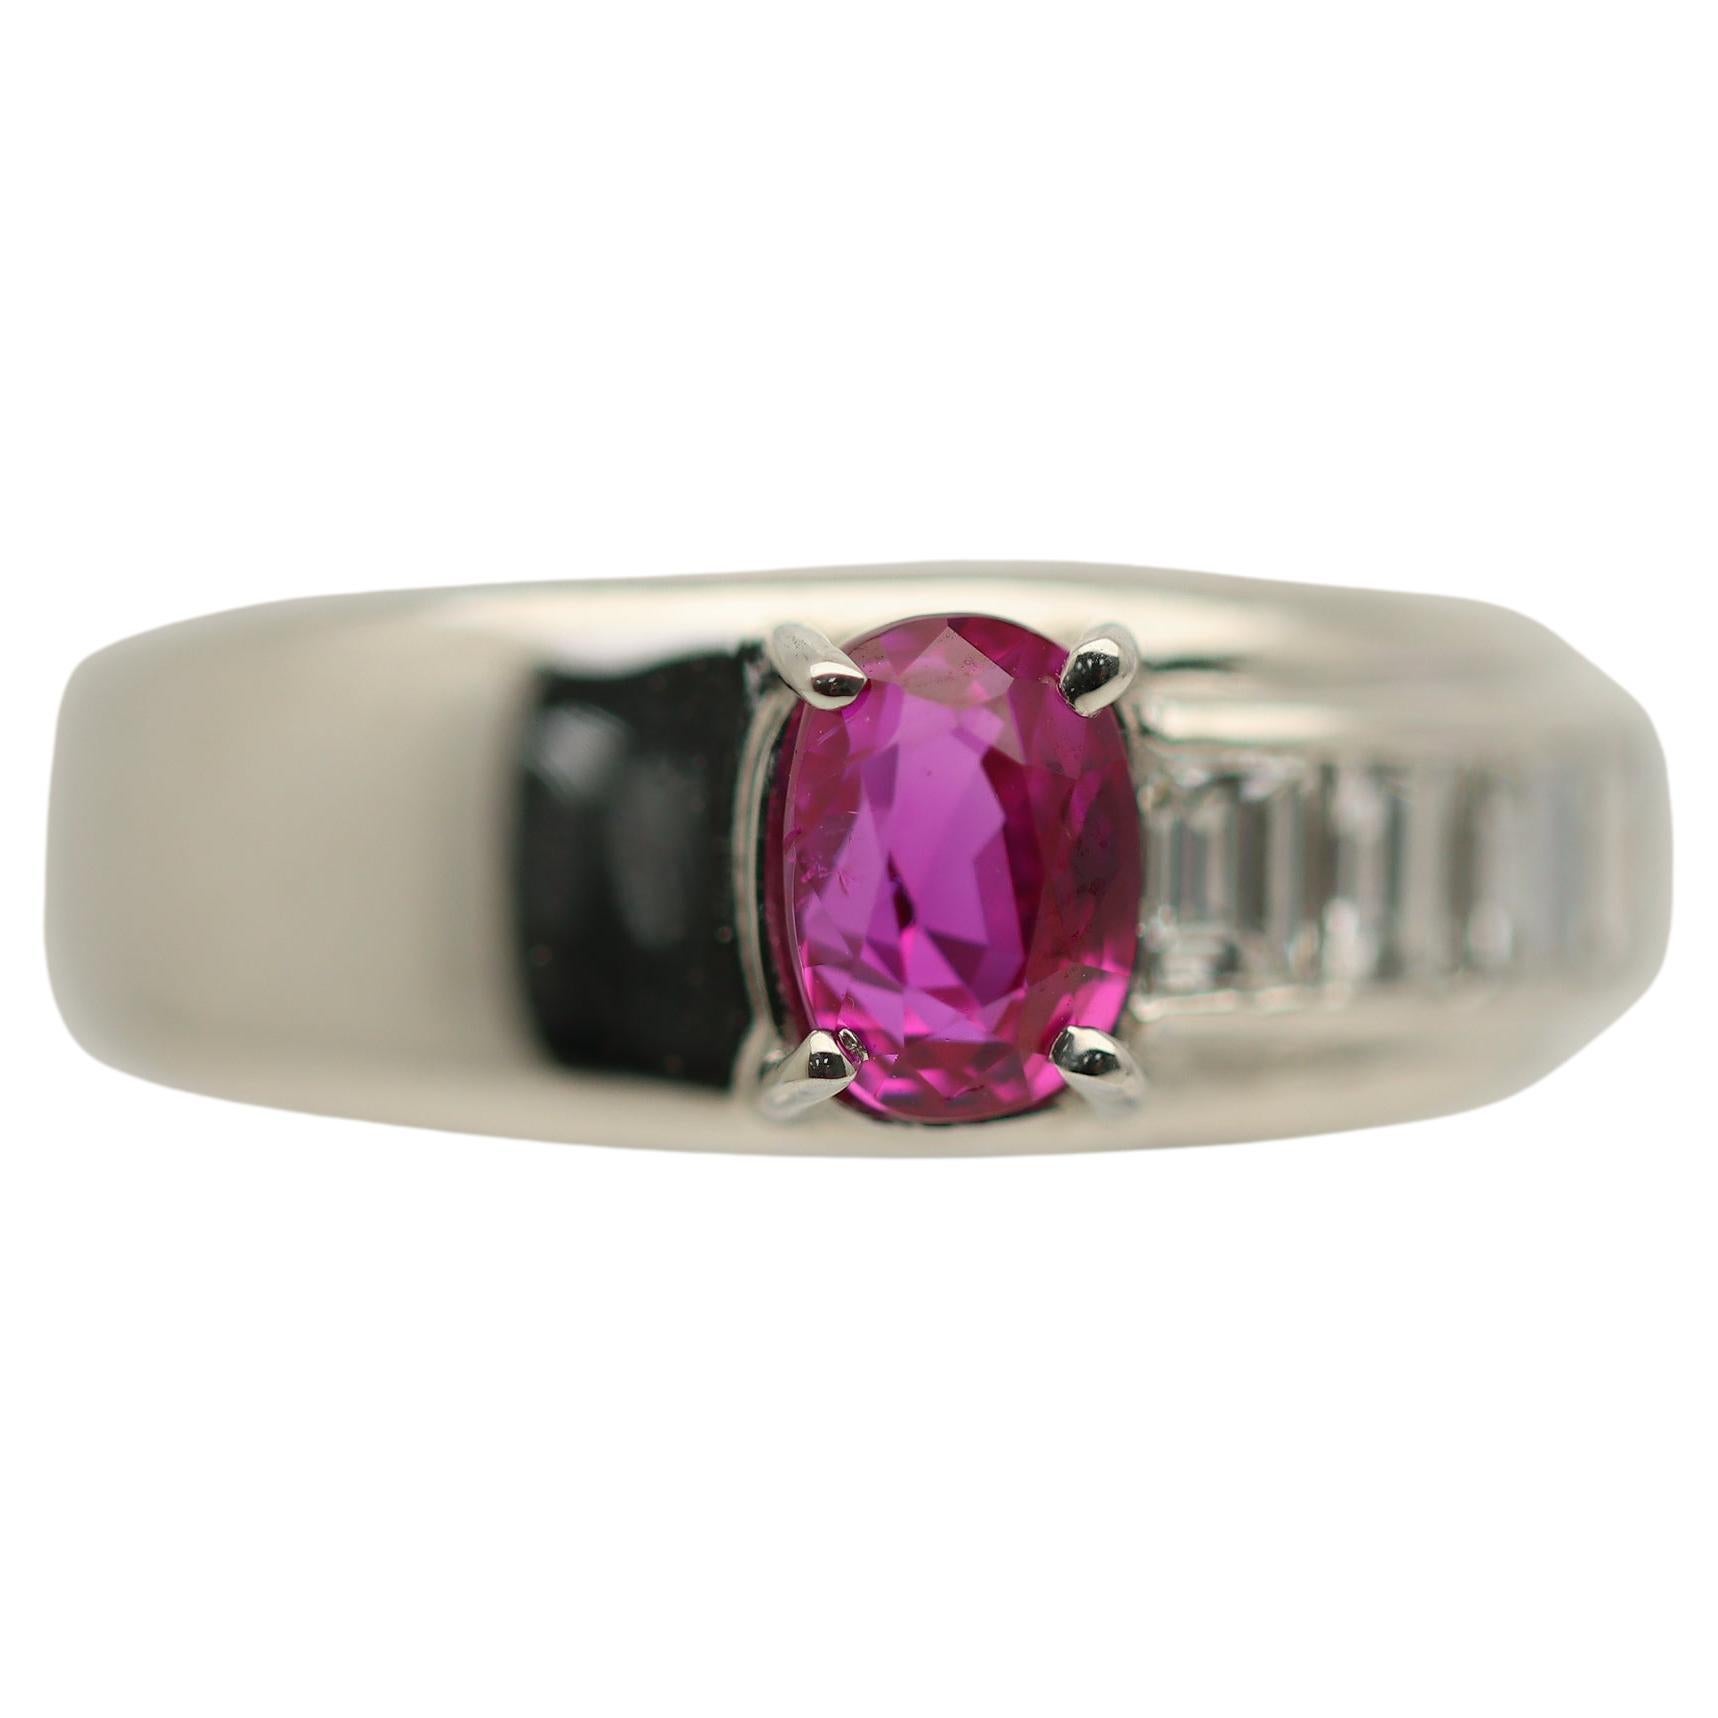 1.04ct Burmese Ruby Diamond Platinum Ring, GIA Certified For Sale